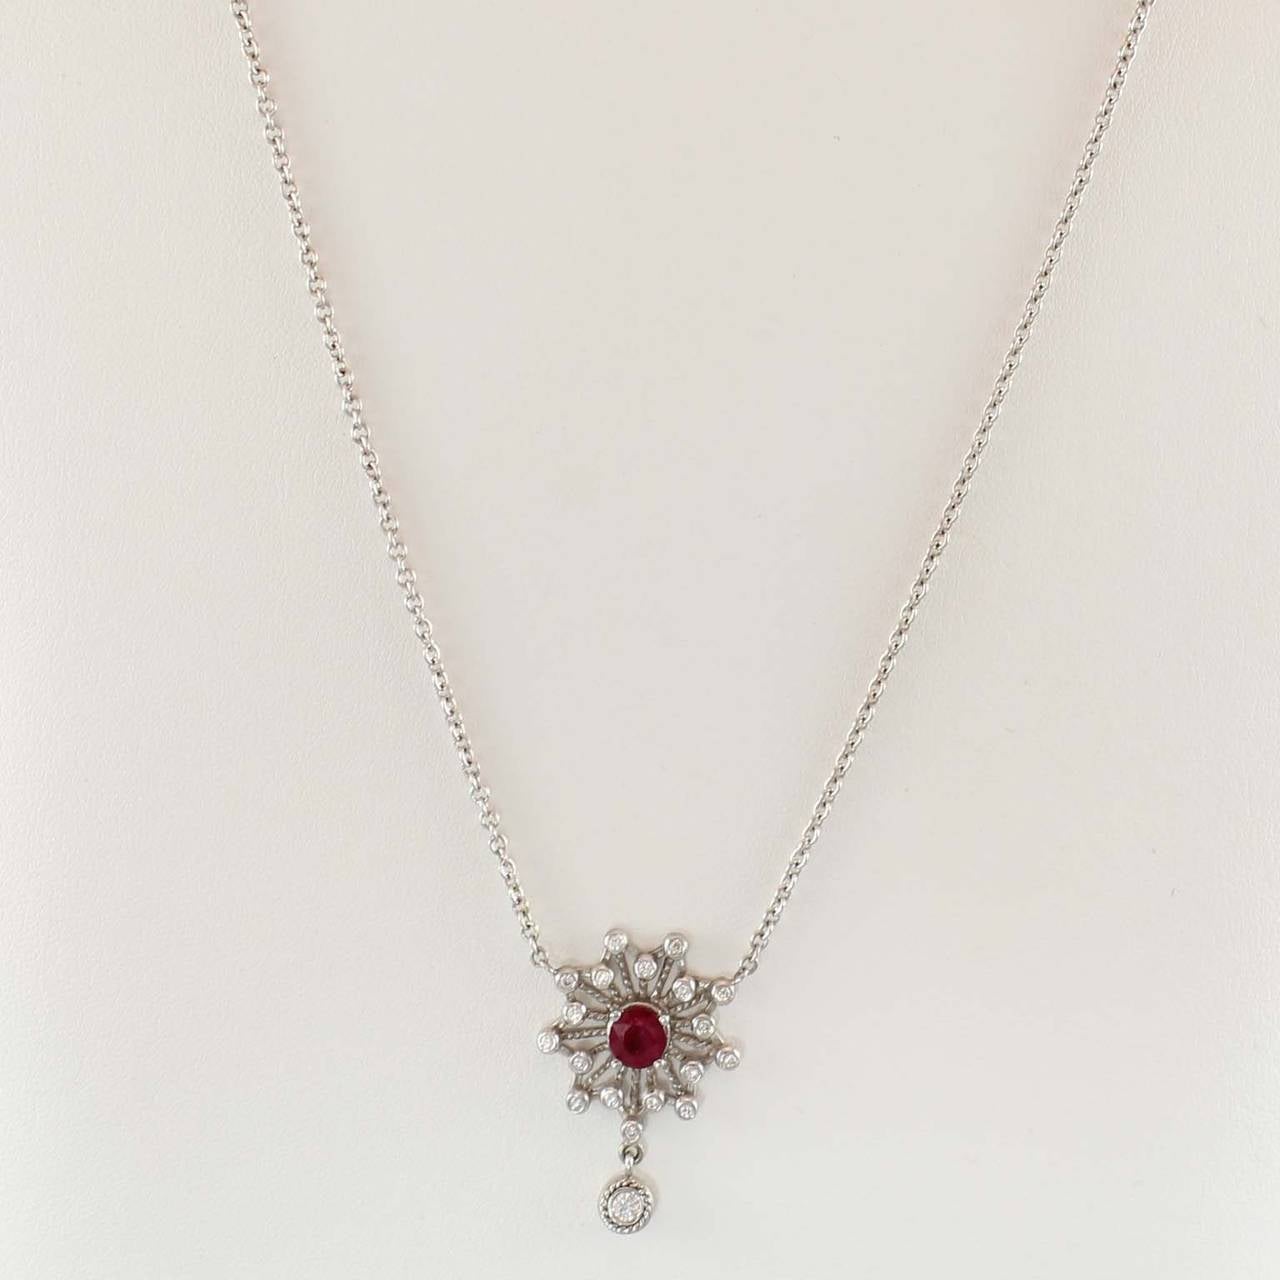 Doris Panos Star Drop Pendant, Lucia Collection,  set with one round faceted red ruby weighing 1.10 carats, and 19 full cut round diamonds weighing .30 carats total suspended from a 16 inch 18K white gold cable link chain.